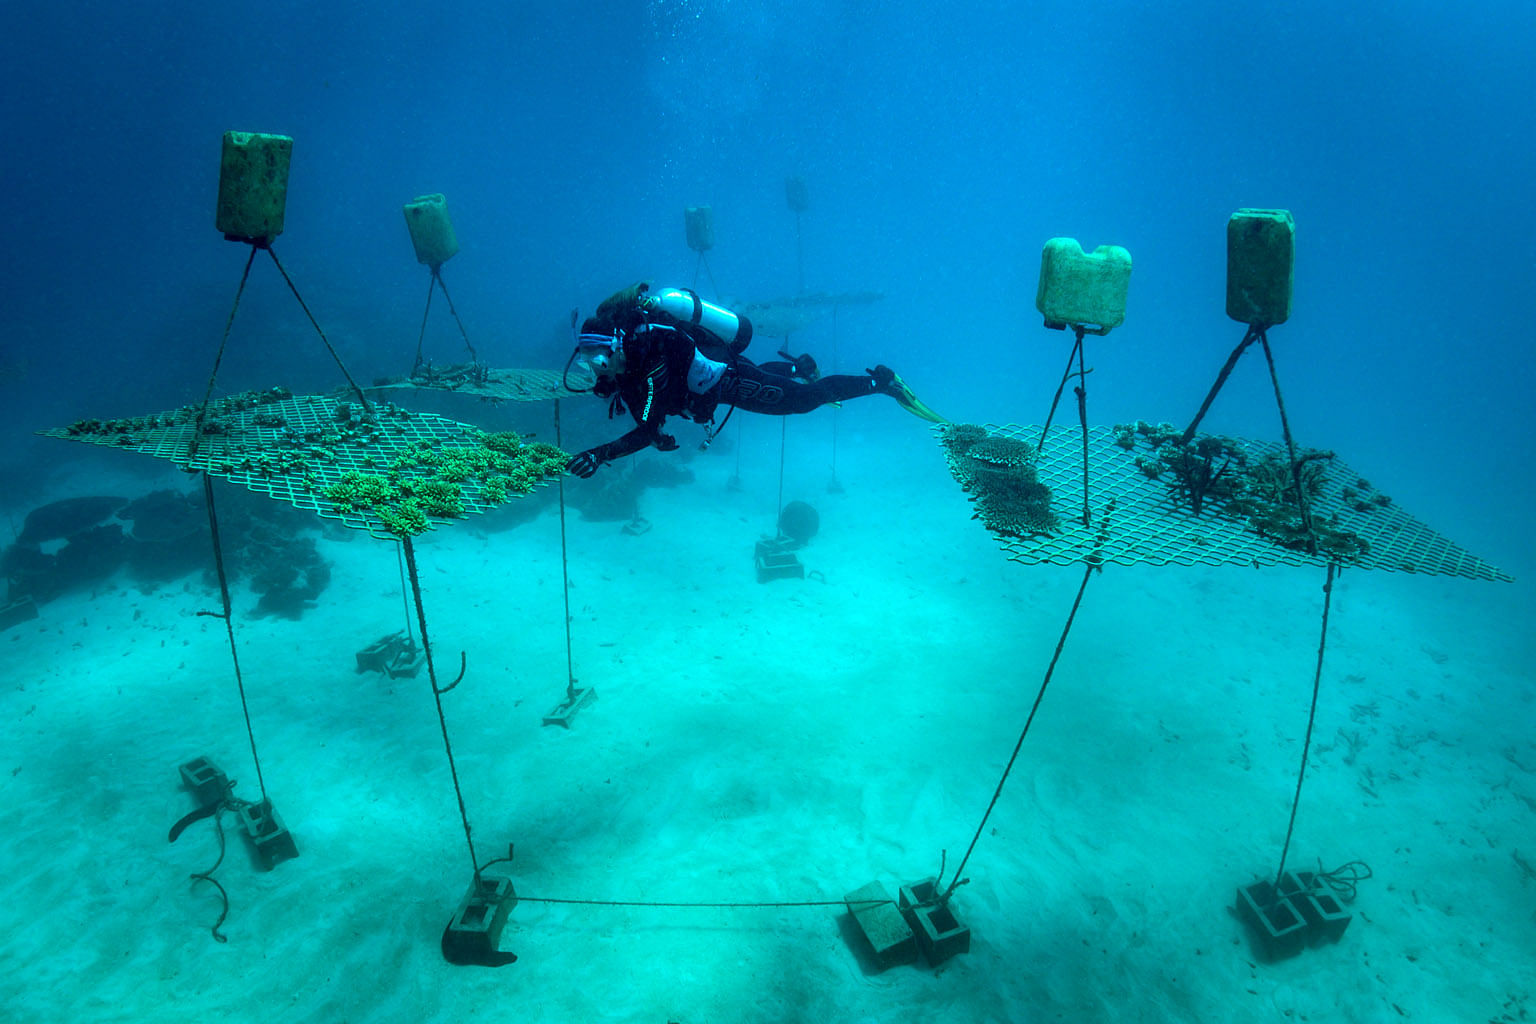 Dr Camp monitors corals growing in an underwater nursery on the Opal Reef, near Port Douglas. PHOTO: ROLEX/FRANCK GAZZOLA